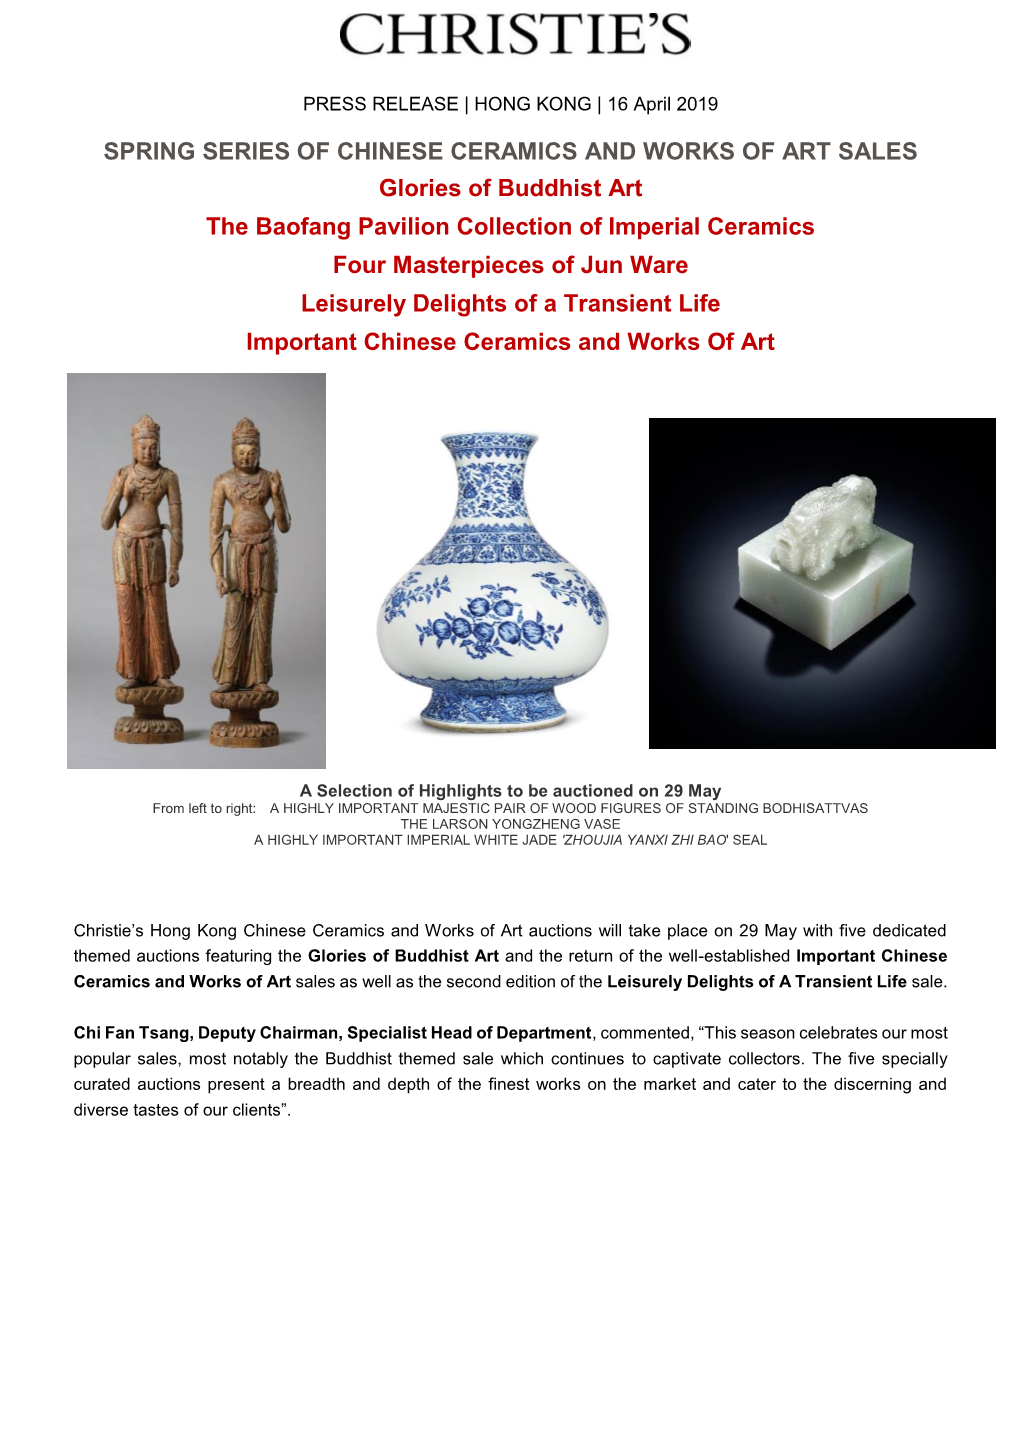 Spring Series of Chinese Ceramics and Works of Art